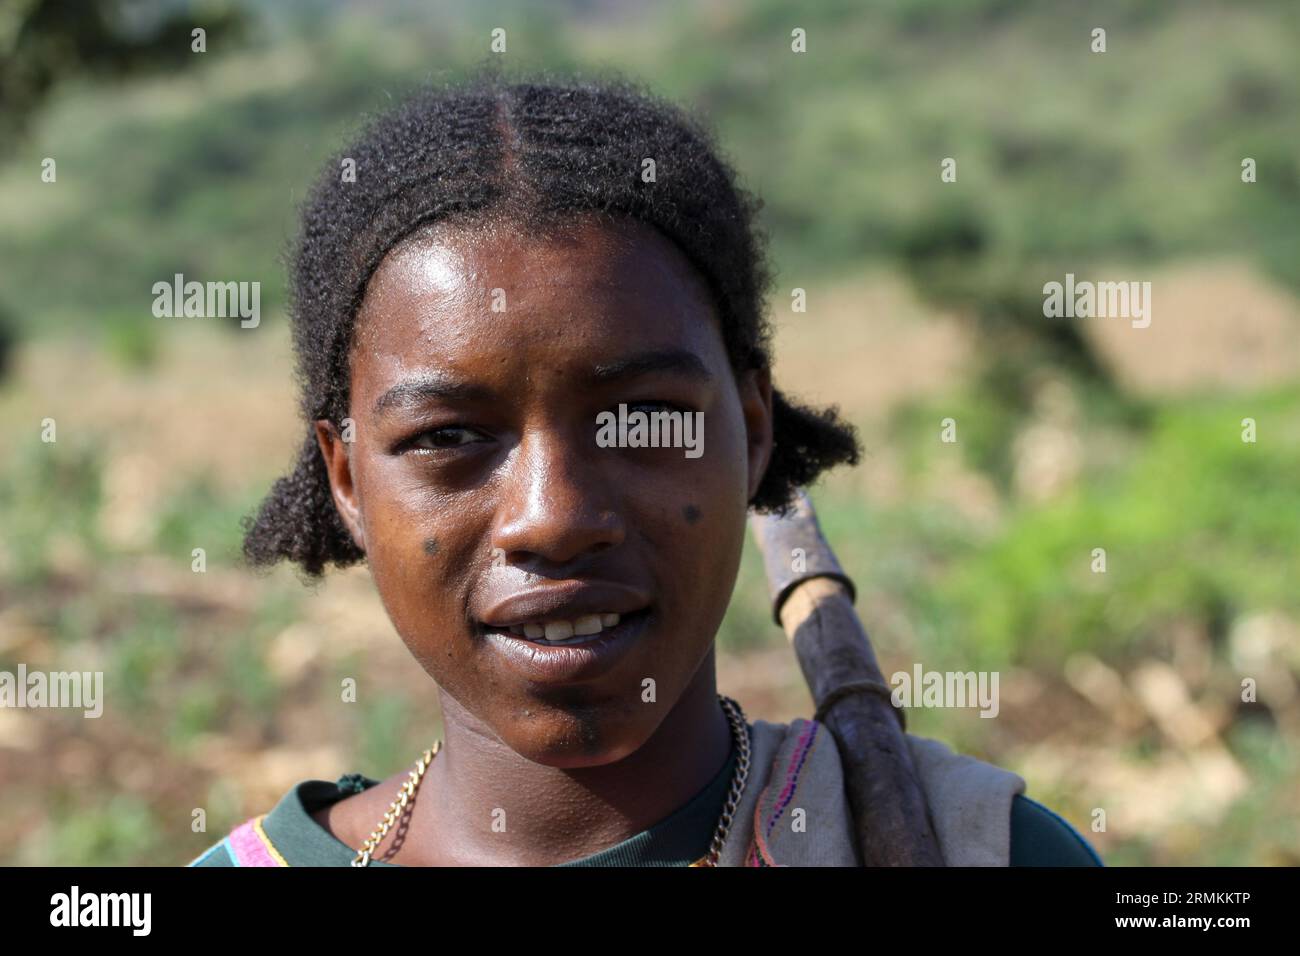 Male member of the Gamo Tribe The Gamo people are an Ethiopian ethnic group located in the Gamo Highlands of southern Ethiopia. They are found in more Stock Photo